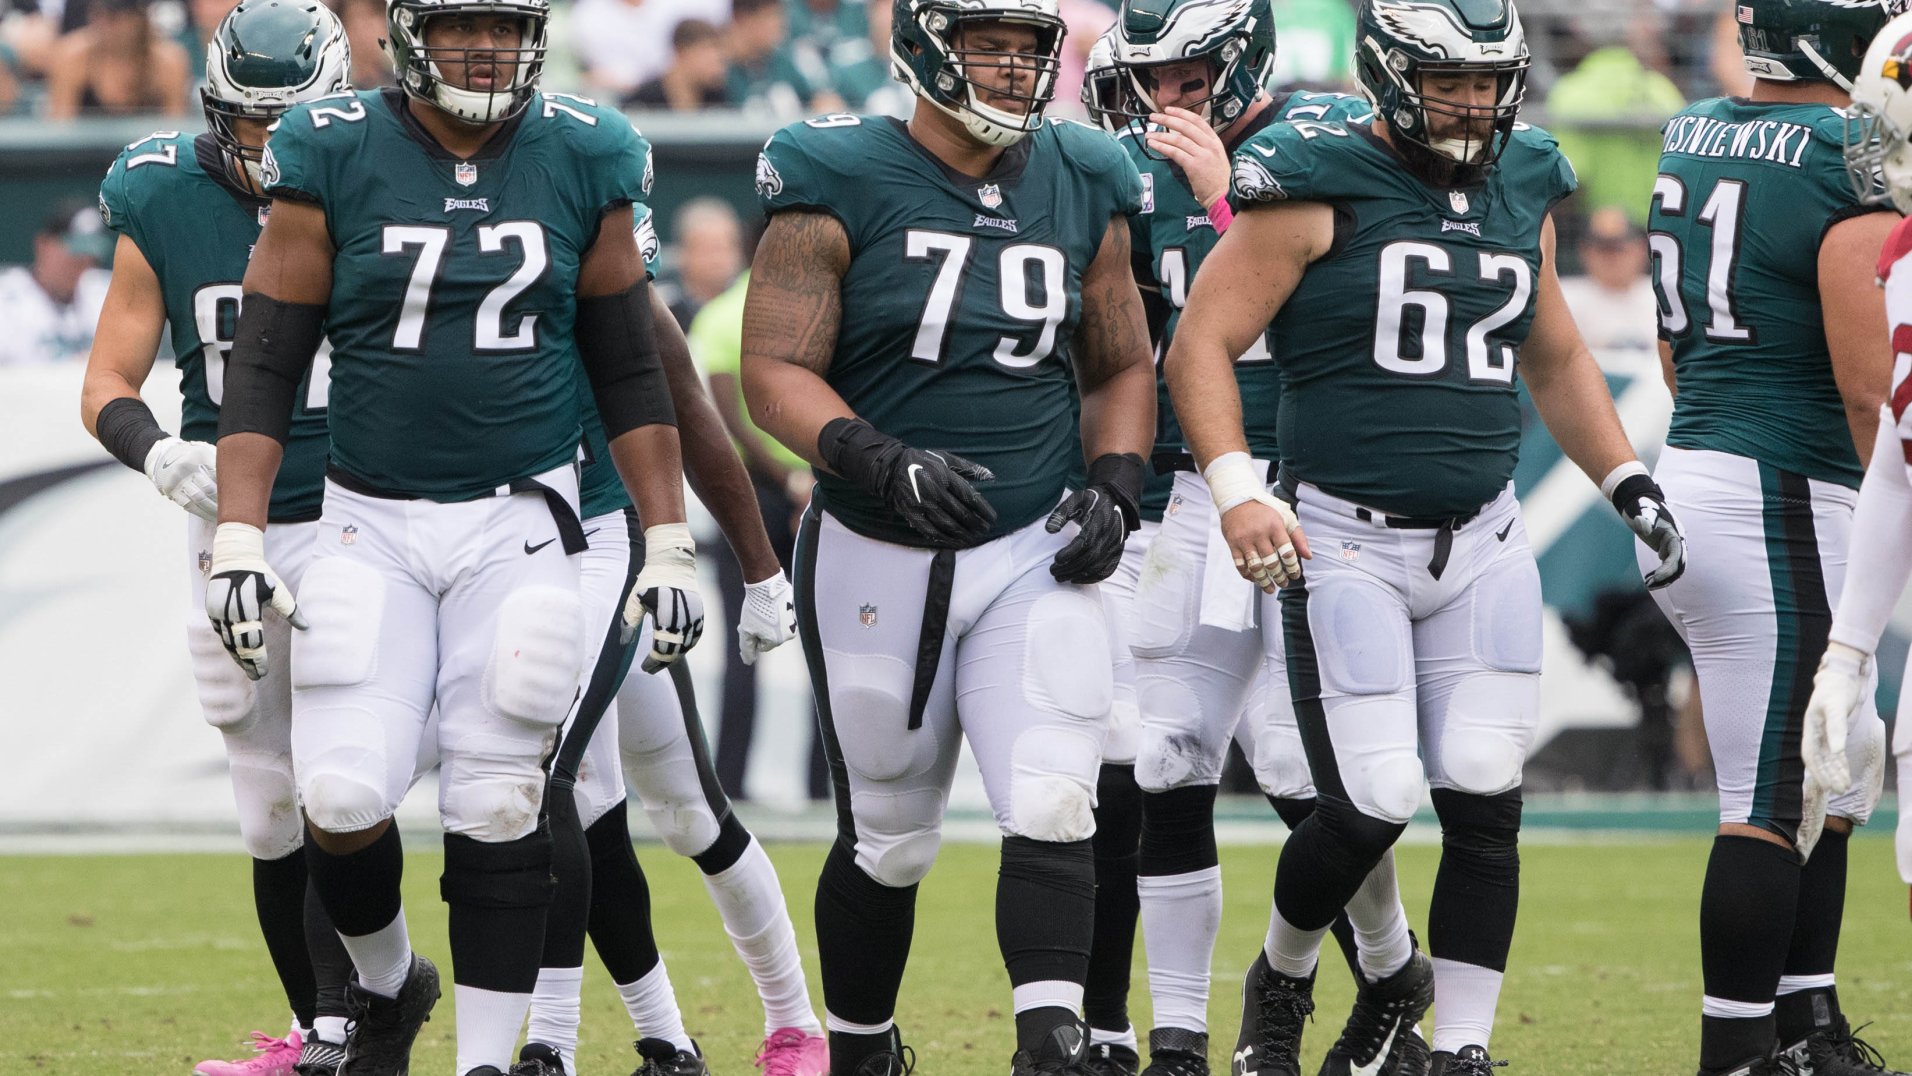 Philadelphia rides their OLine to the Super Bowl, selected as PFF's Offensive Line of the Year